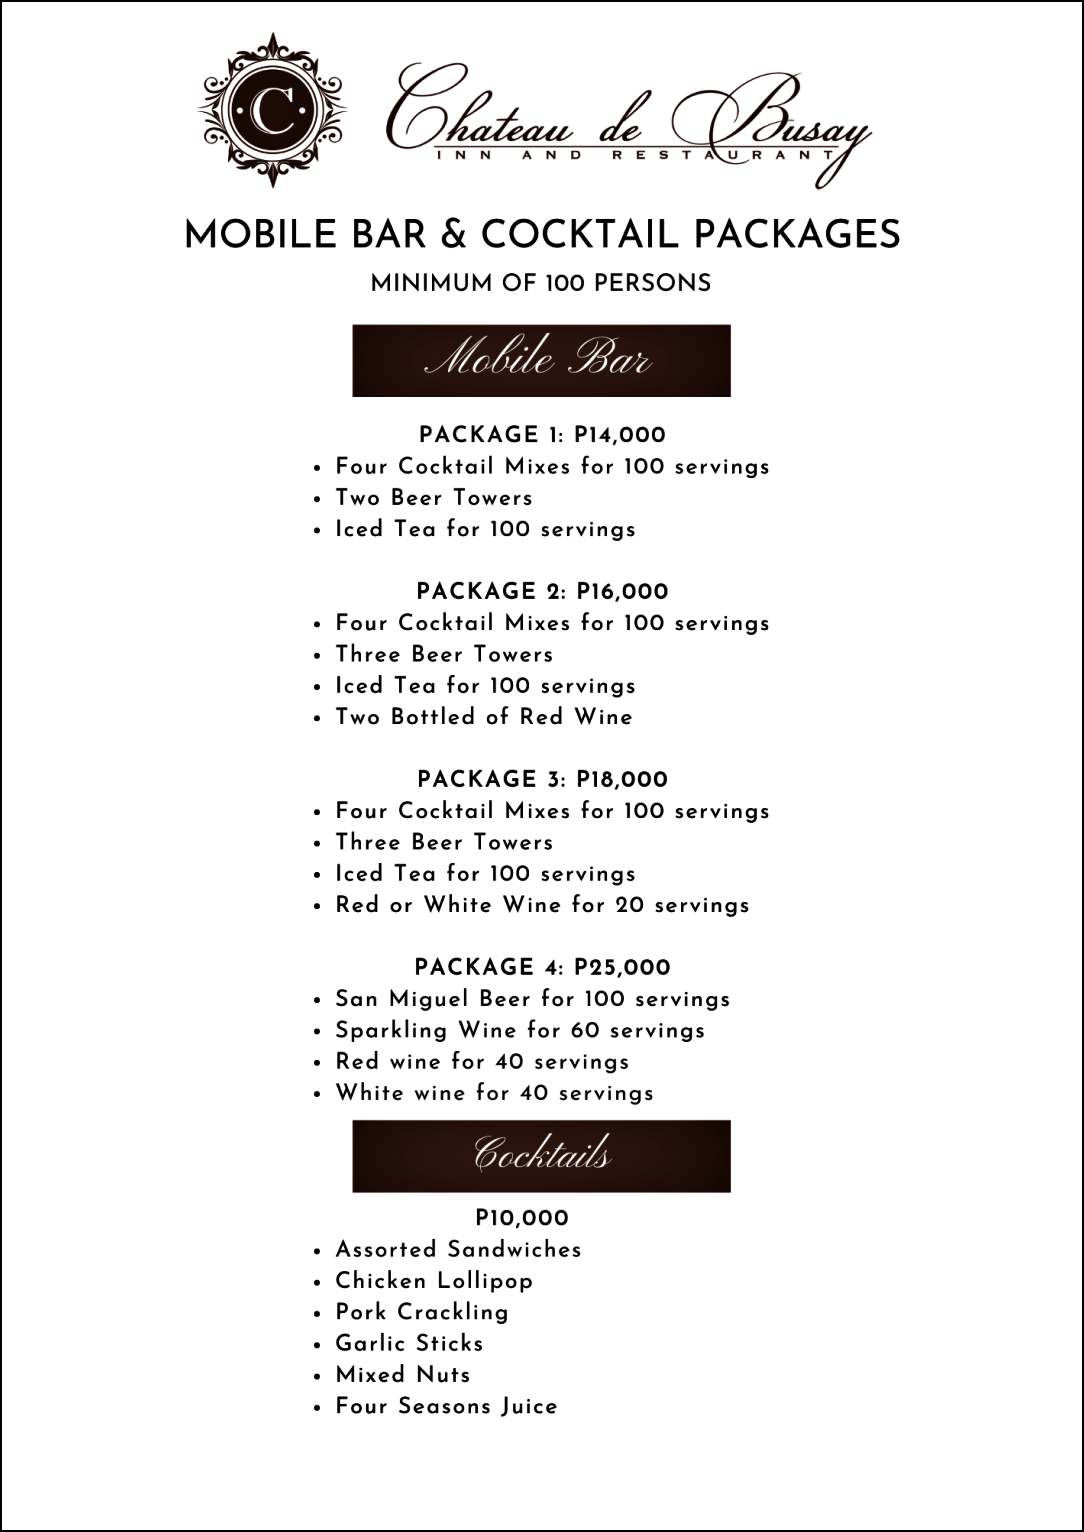 MOBILE BAR AND COCKTAIL PACKAGES